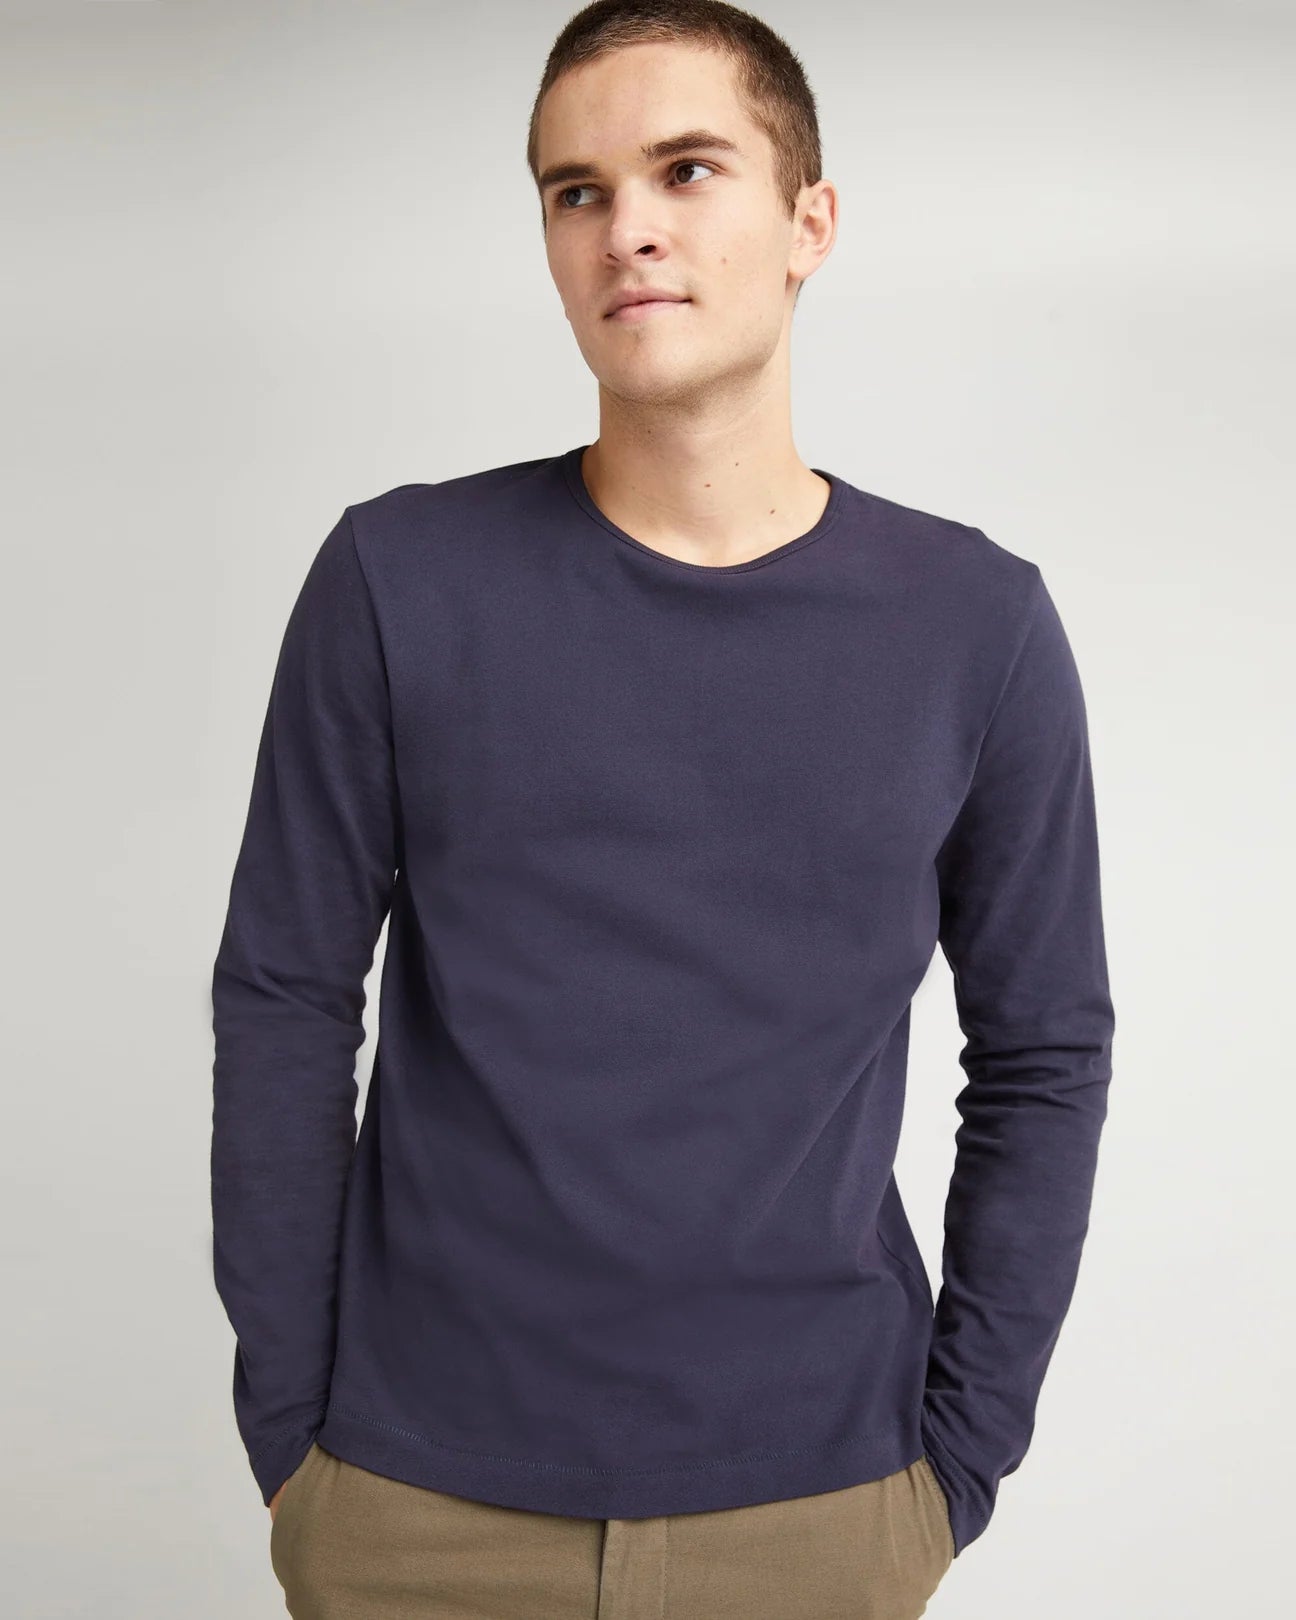 front view of model wearing a long sleeve blue color  t-shirt